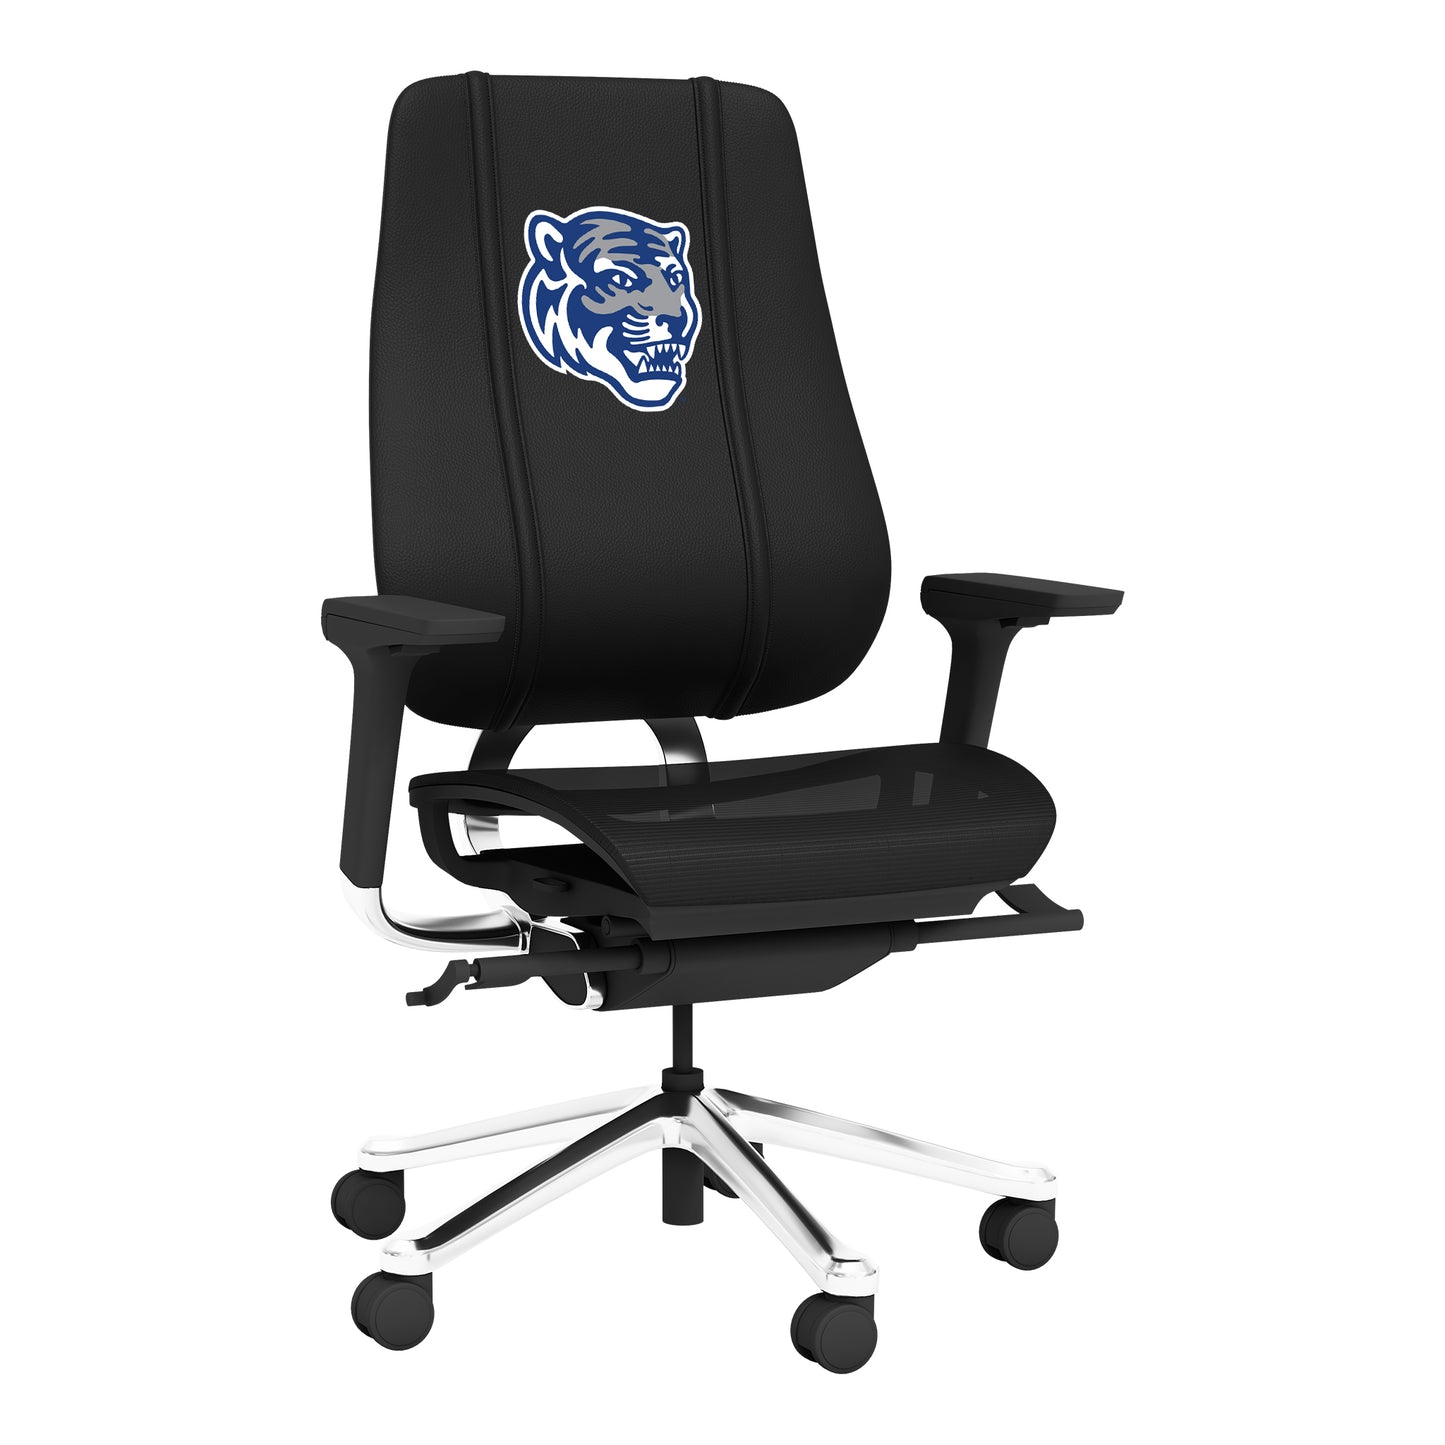 PhantomX Gaming Chair with Memphis Tigers Secondary Logo